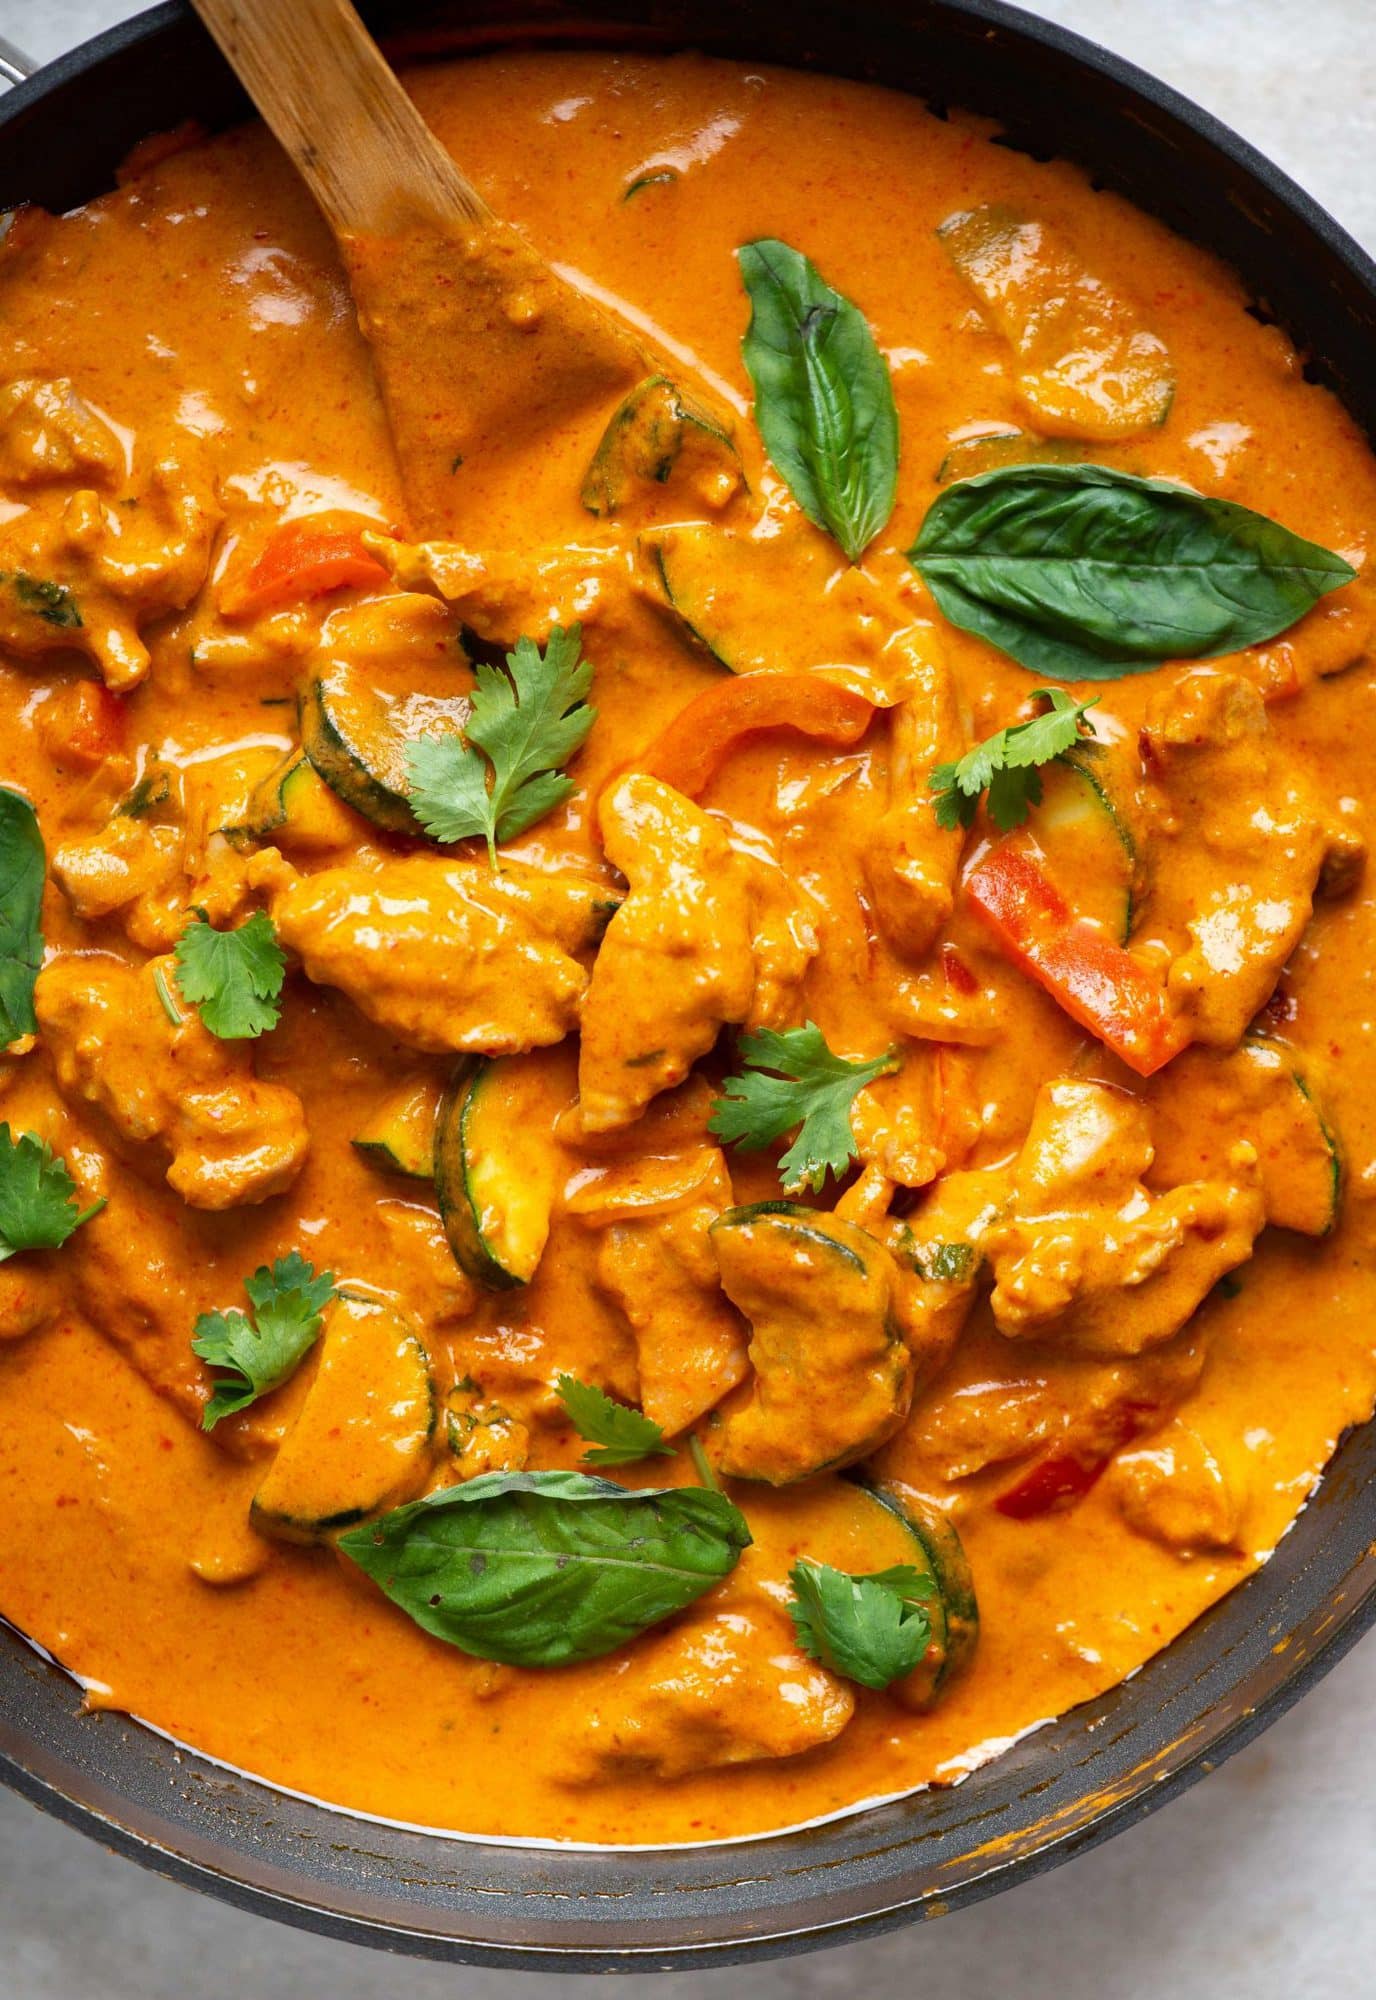 Thai Red Curry With Chicken - The flavours of kitchen